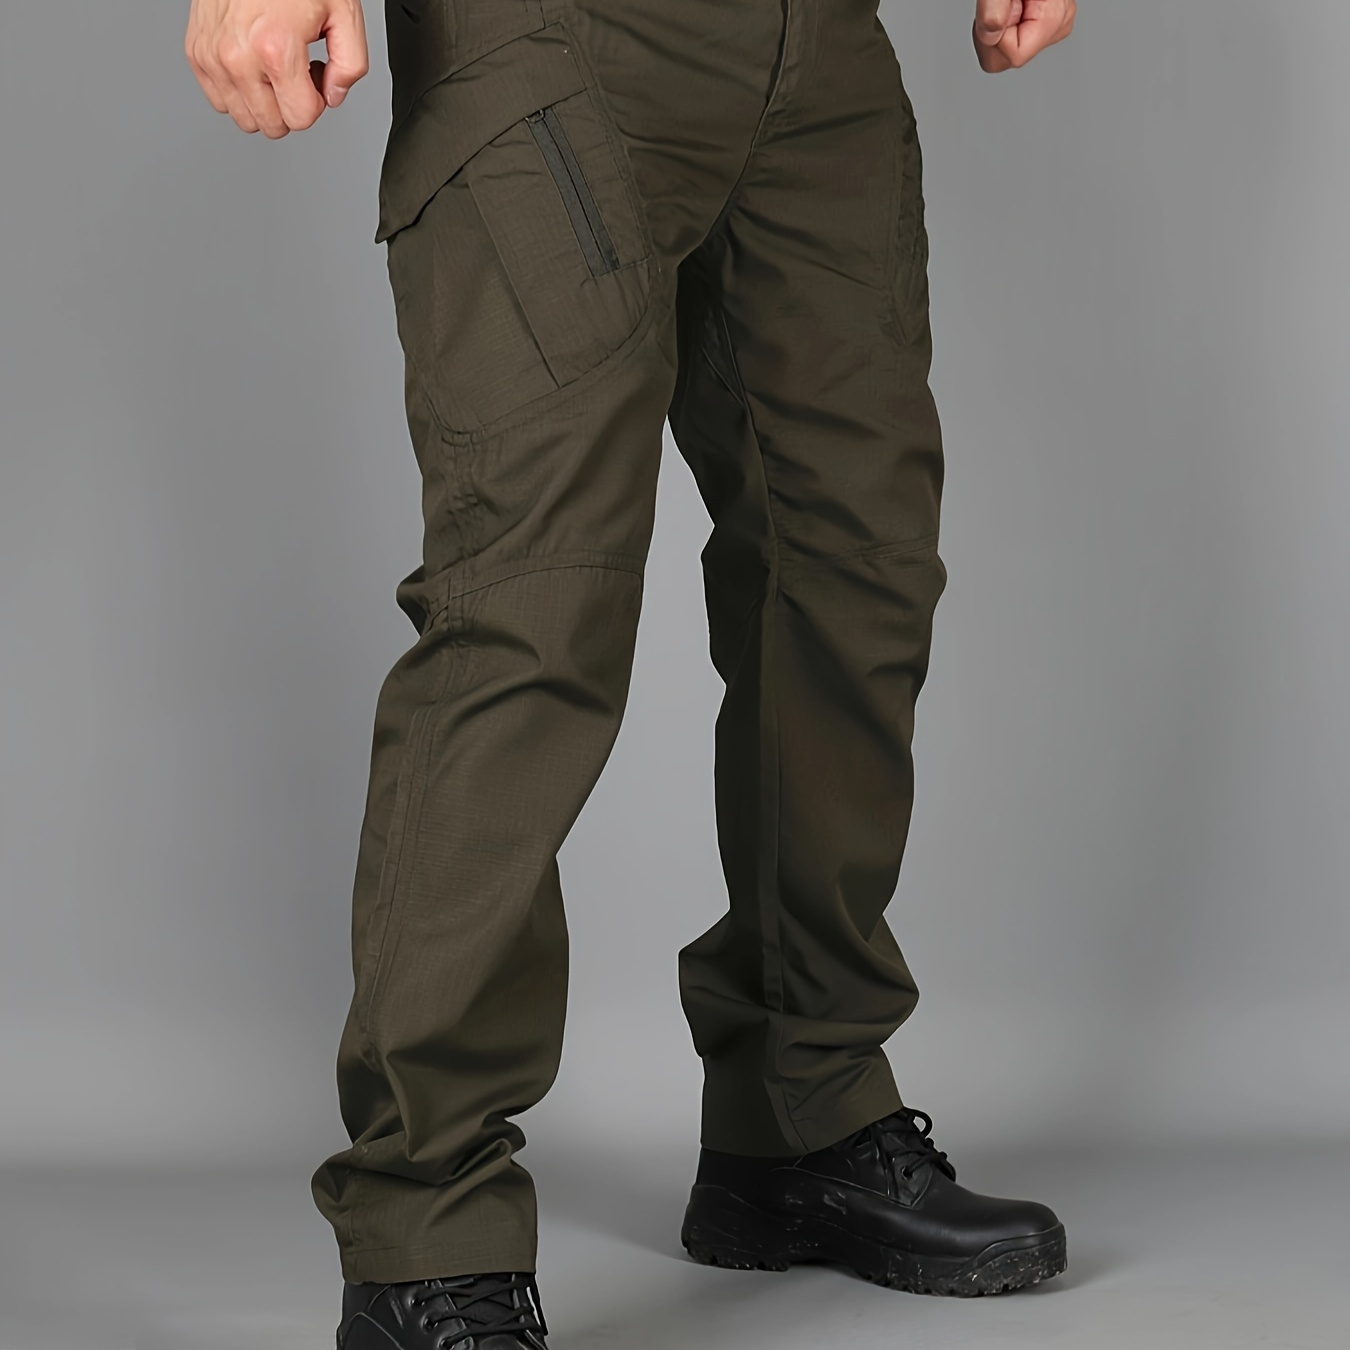 

Men's Tactical Cargo Pants, Waterproof Multi-pocket Outdoor Trousers For Hiking Camping And Mountaineering